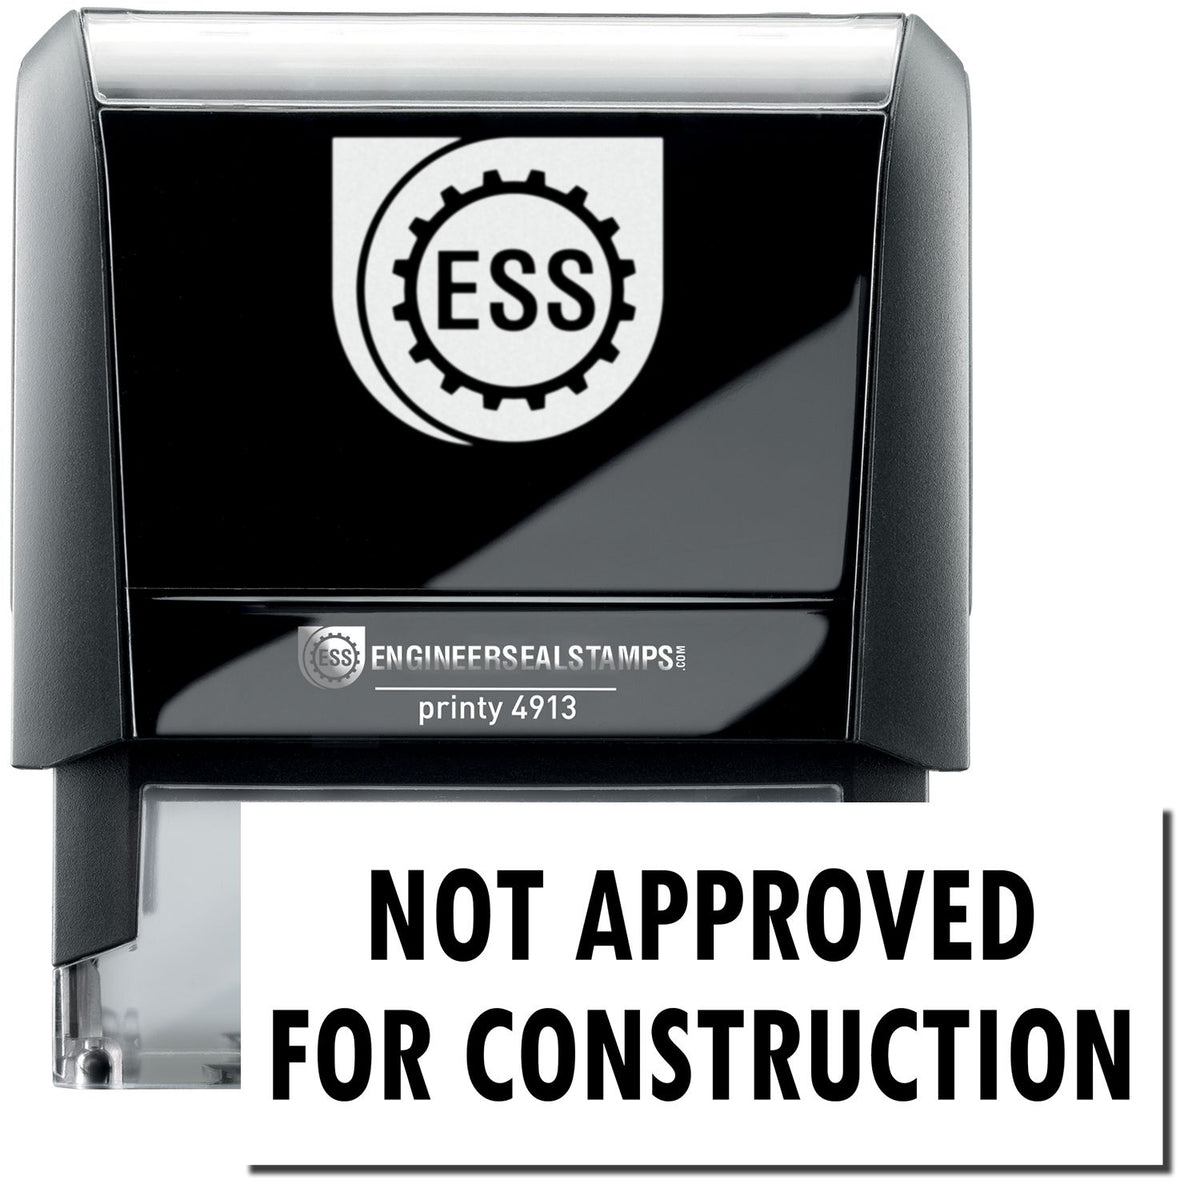 A self-inking stamp with a stamped image showing the text &quot;NOT APPROVED FOR CONSTRUCTION&quot; in a large bold font.